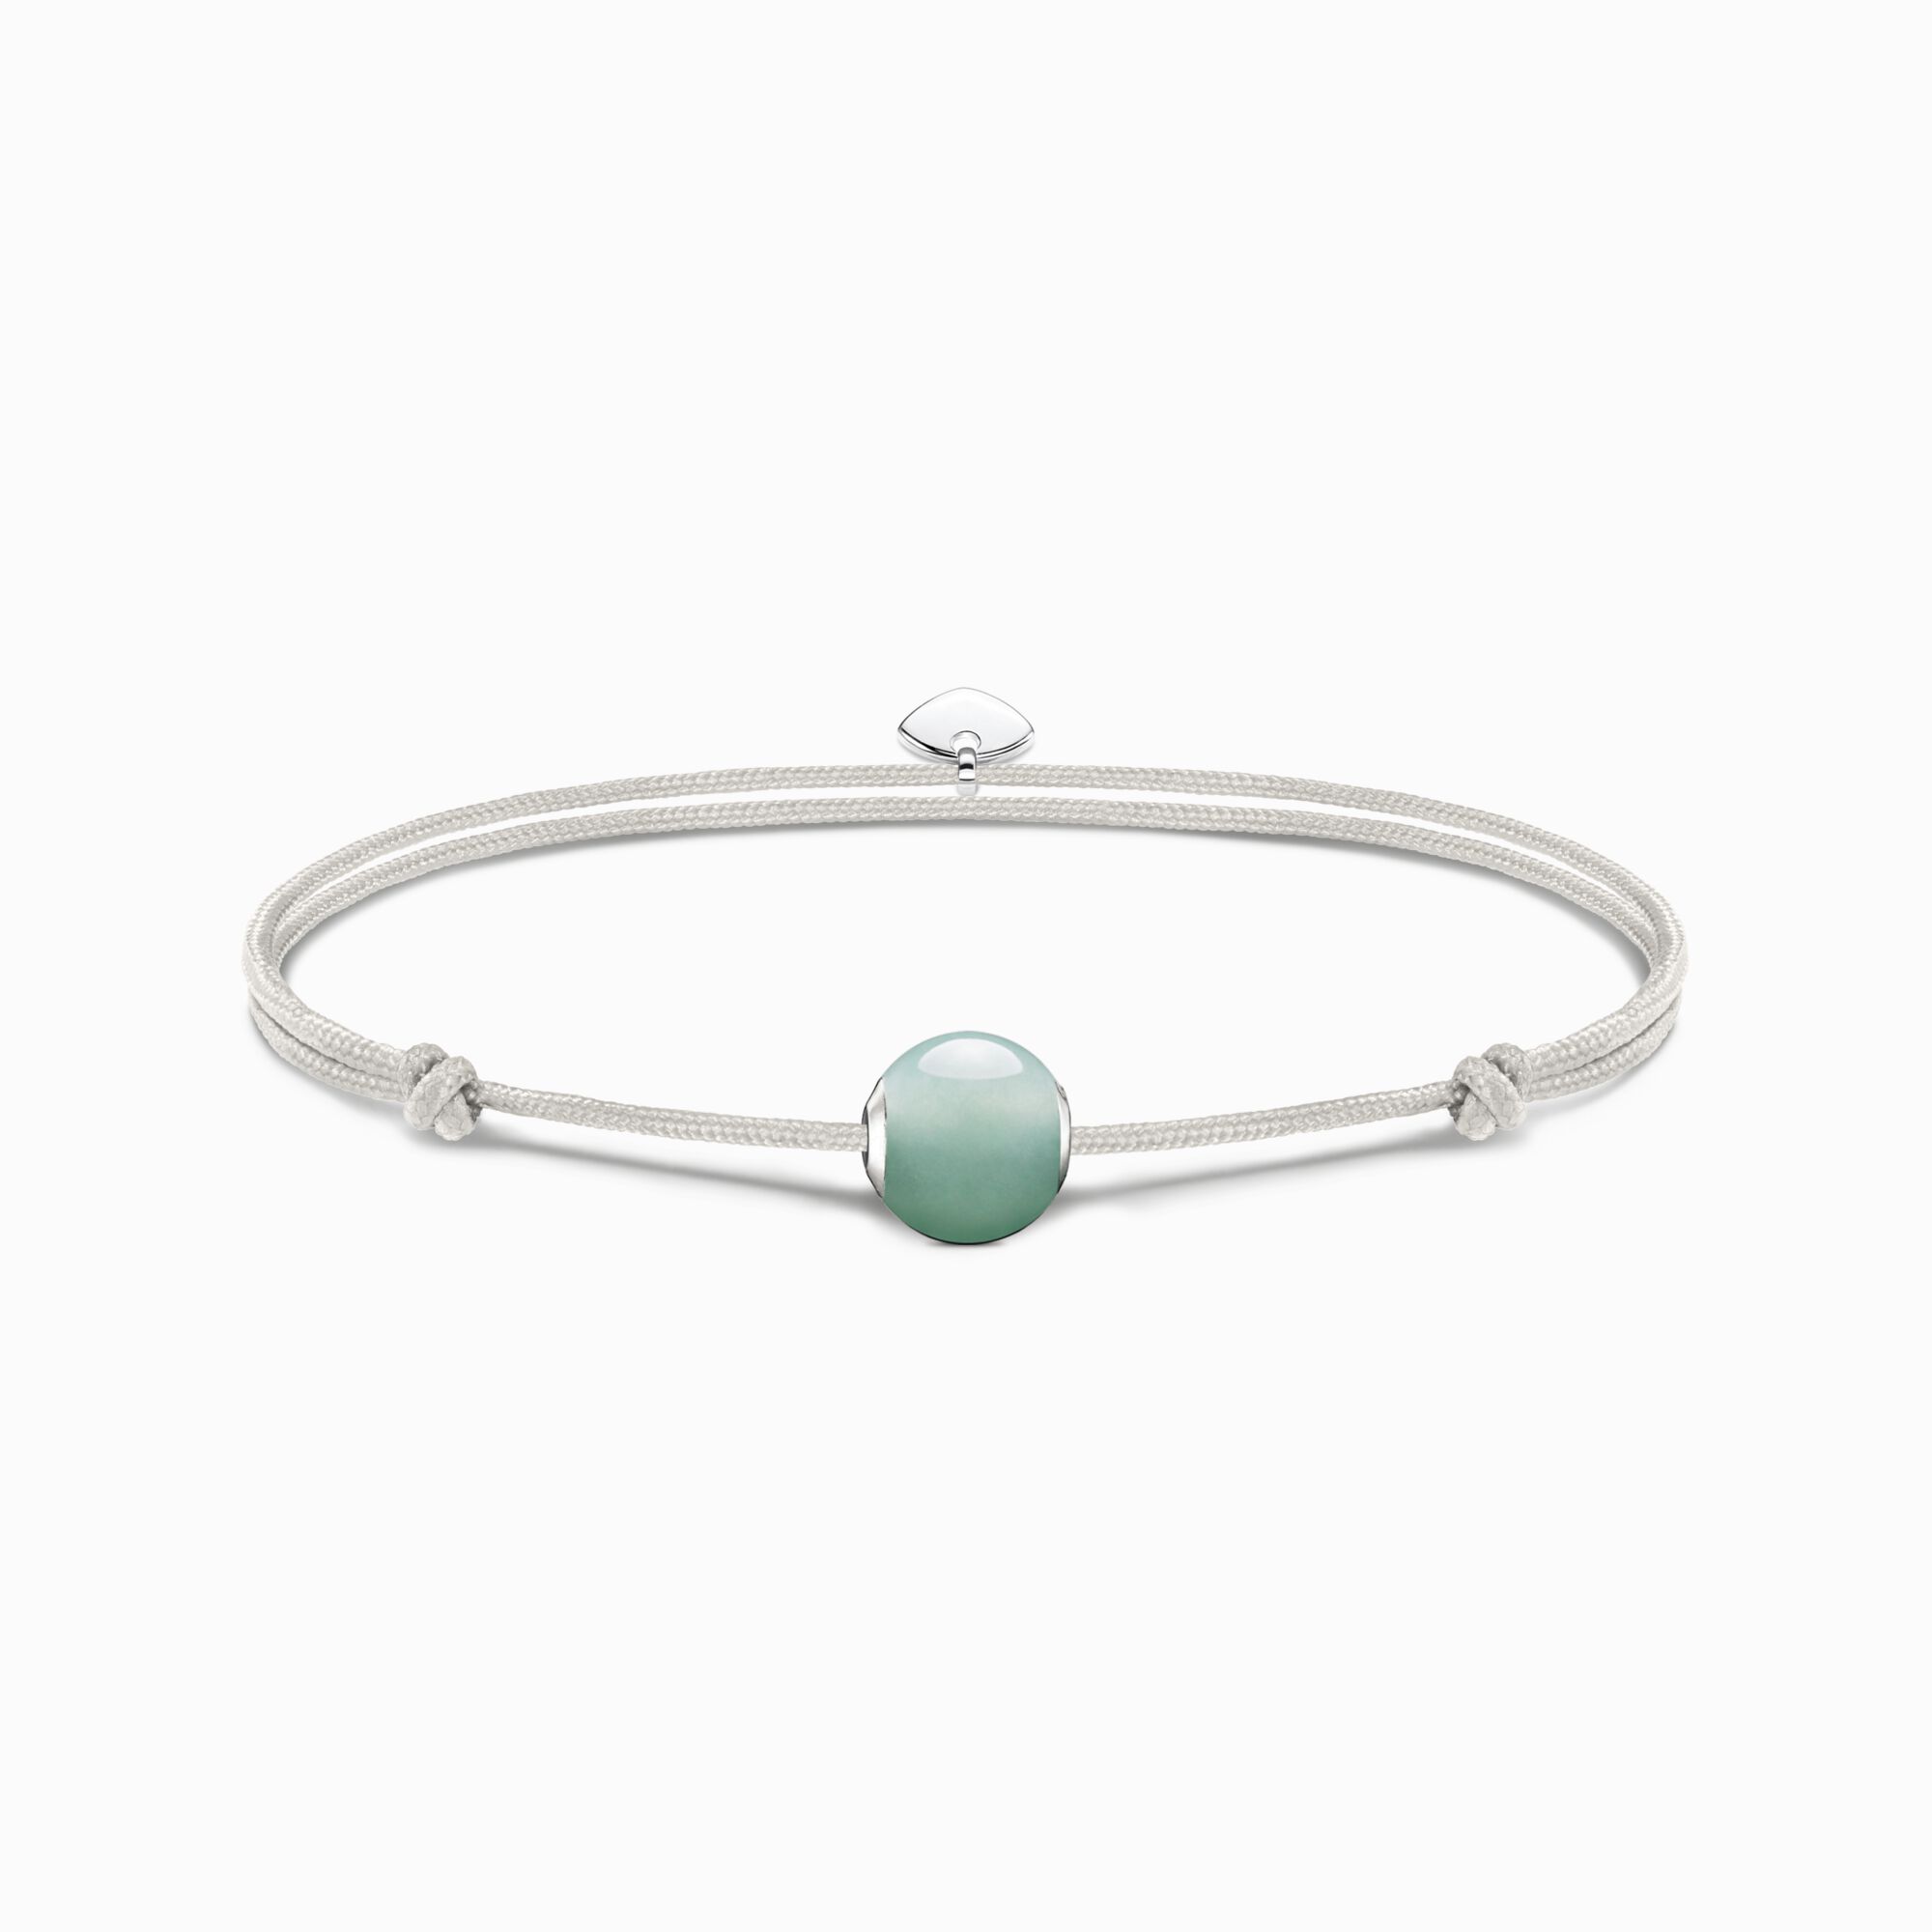 Bracelet Karma Secret with green aventurine Bead from the Karma Beads collection in the THOMAS SABO online store